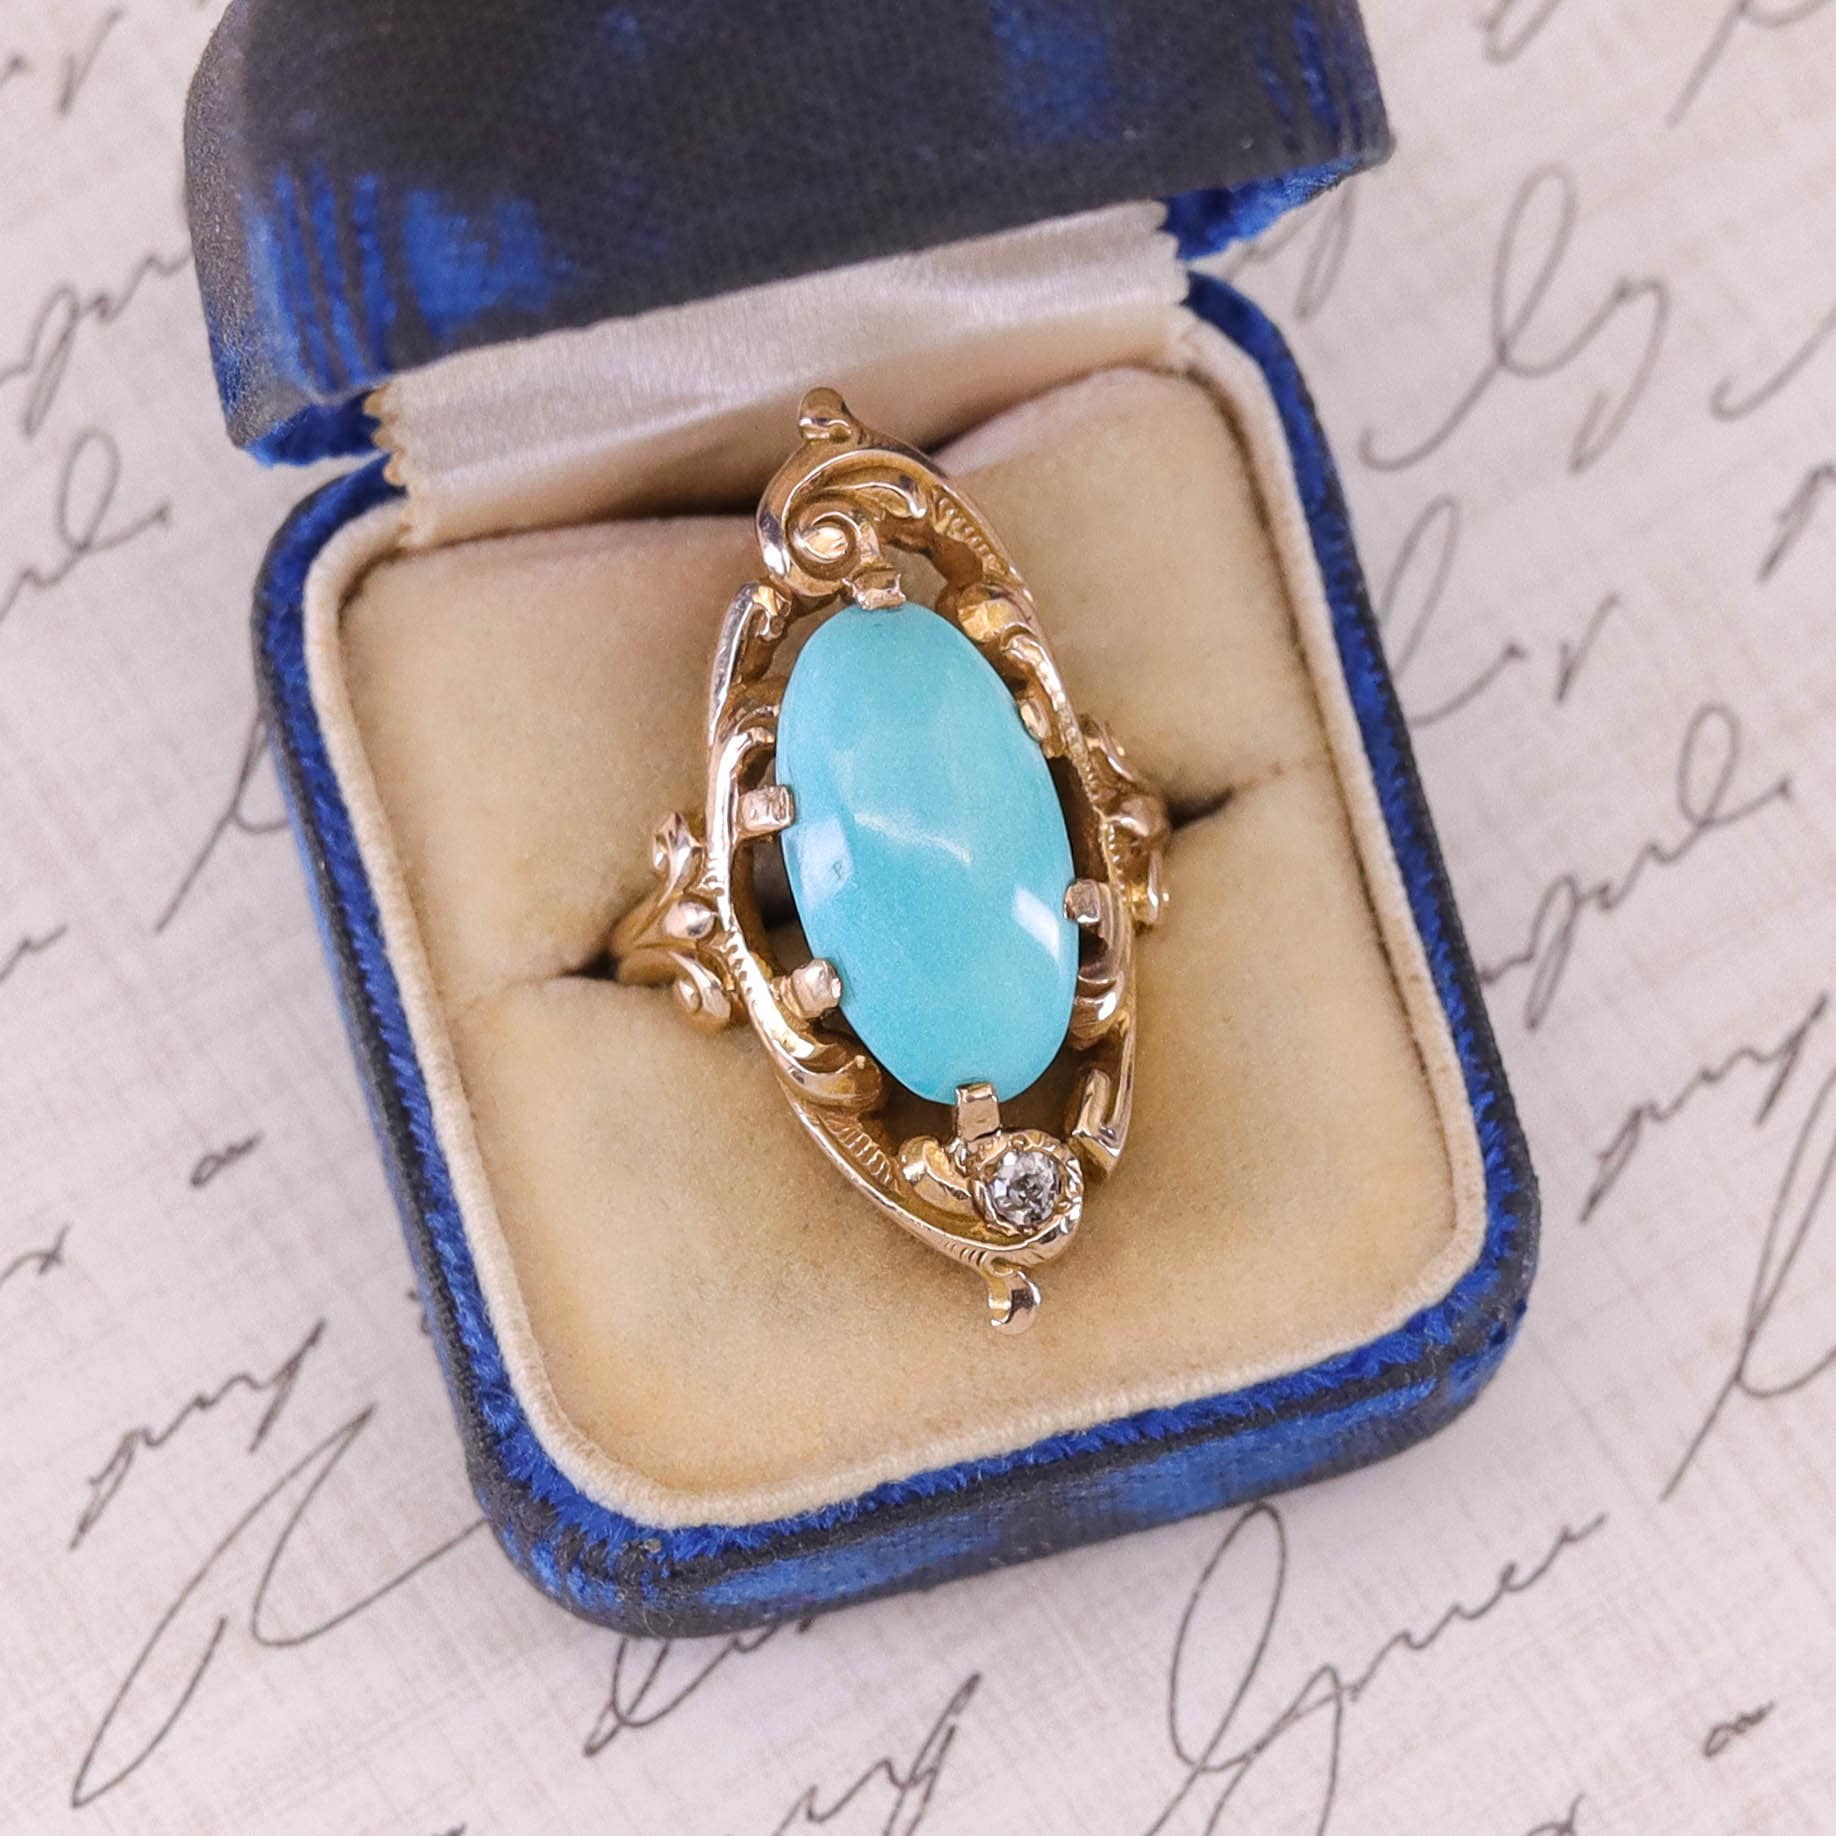 Antique Turquoise and Diamond Ring of 10k Gold